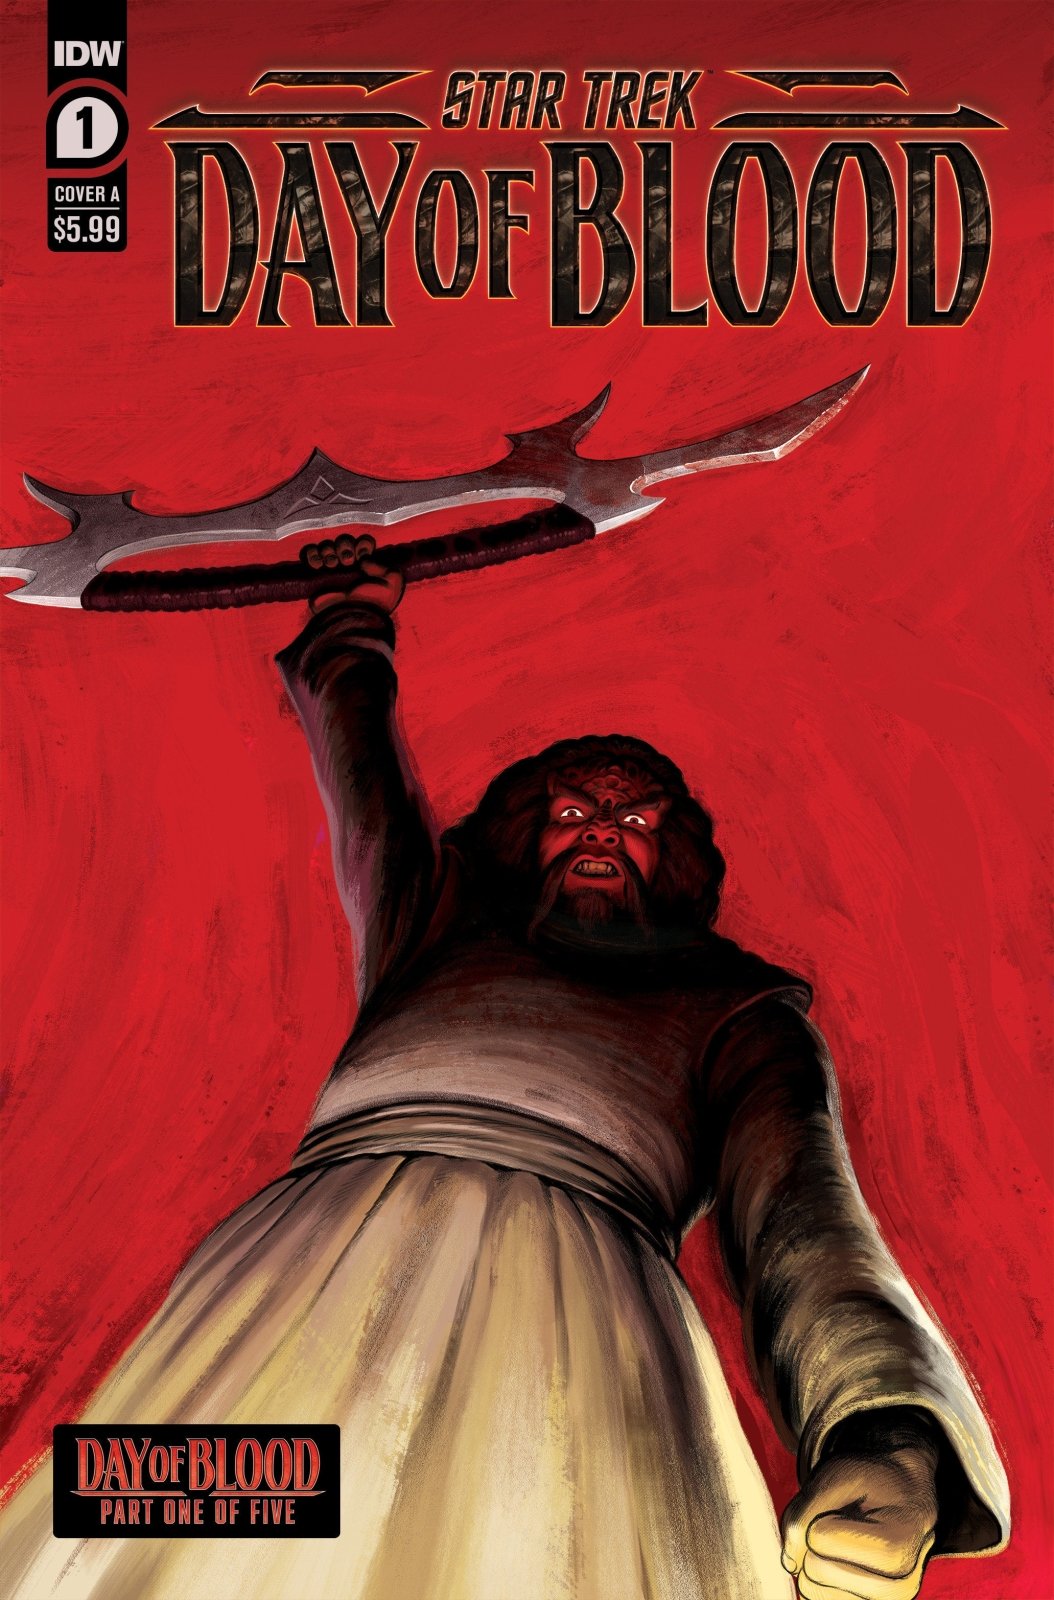 Star Trek: Day Of Blood #1 Cover A (Ward) - The Fourth Place